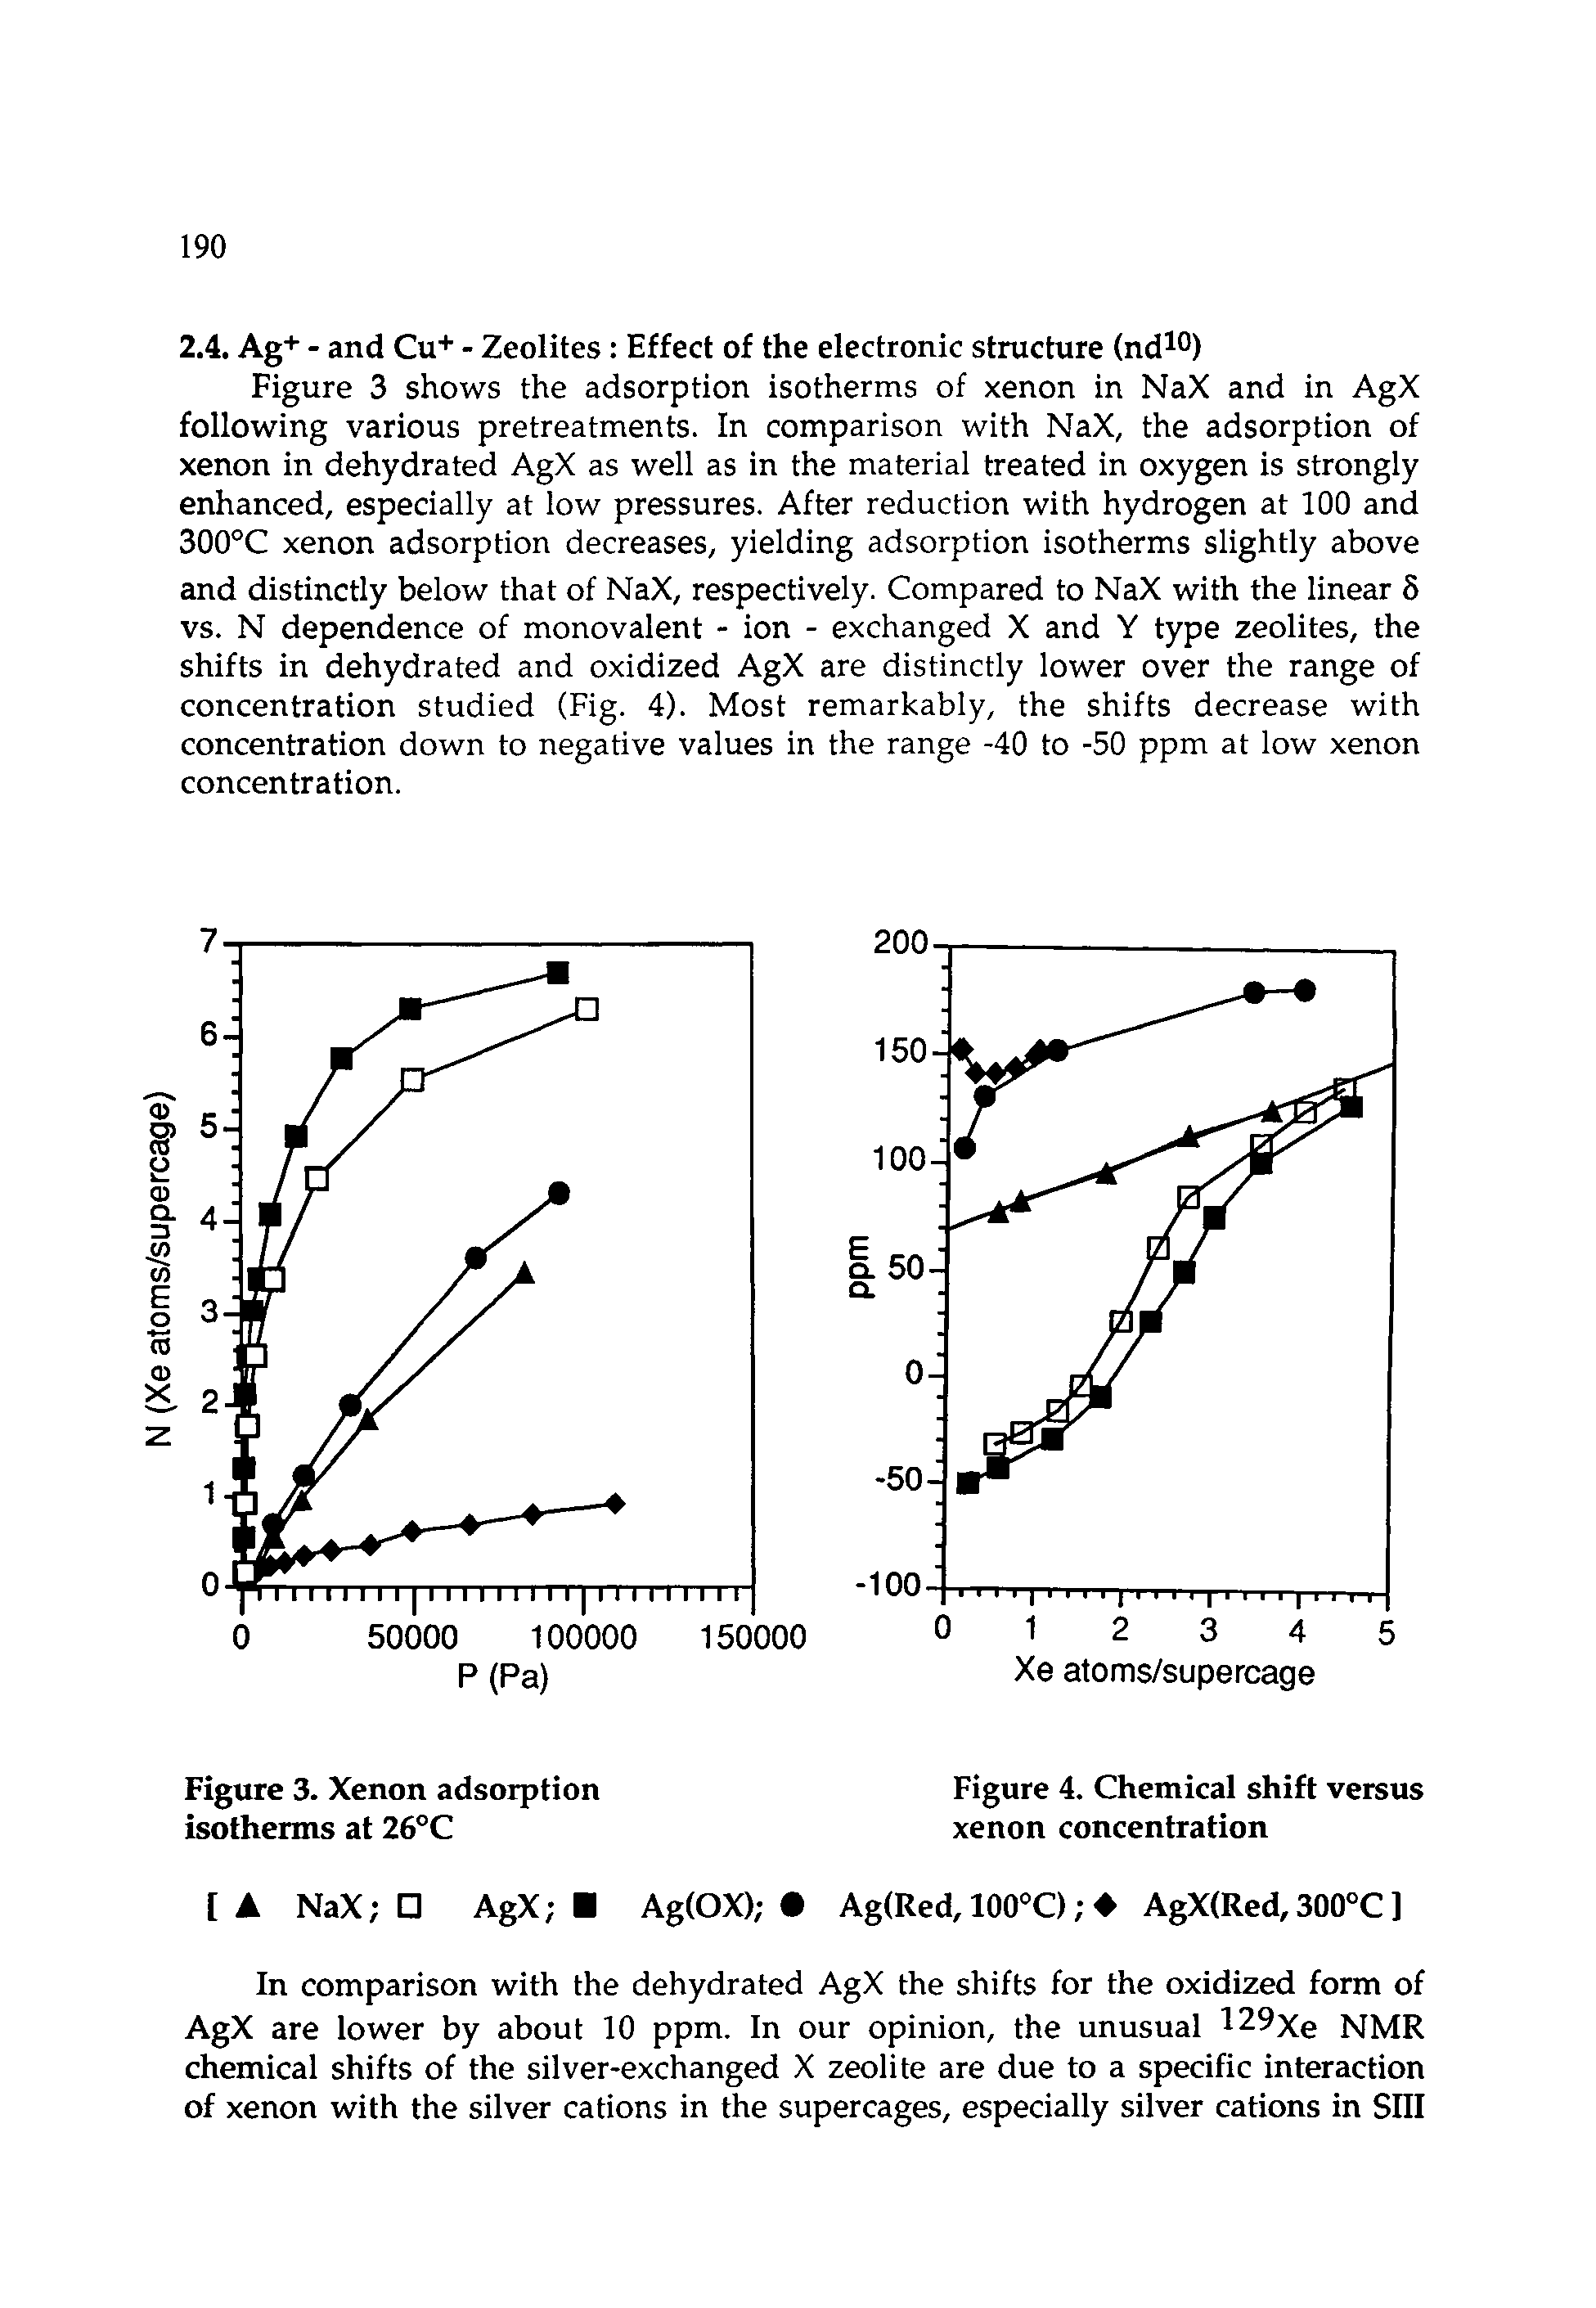 Figure 3 shows the adsorption isotherms of xenon in NaX and in AgX following various pretreatments. In comparison with NaX, the adsorption of xenon in dehydrated AgX as well as in the material treated in oxygen is strongly enhanced, especially at low pressures. After reduction with hydrogen at 100 and 300°C xenon adsorption decreases, yielding adsorption isotherms slightly above and distinctly below that of NaX, respectively. Compared to NaX with the linear 5 vs. N dependence of monovalent - ion - exchanged X and Y type zeolites, the shifts in dehydrated and oxidized AgX are distinctly lower over the range of concentration studied (Fig. 4). Most remarkably, the shifts decrease with concentration down to negative values in the range -40 to -50 ppm at low xenon concentration.